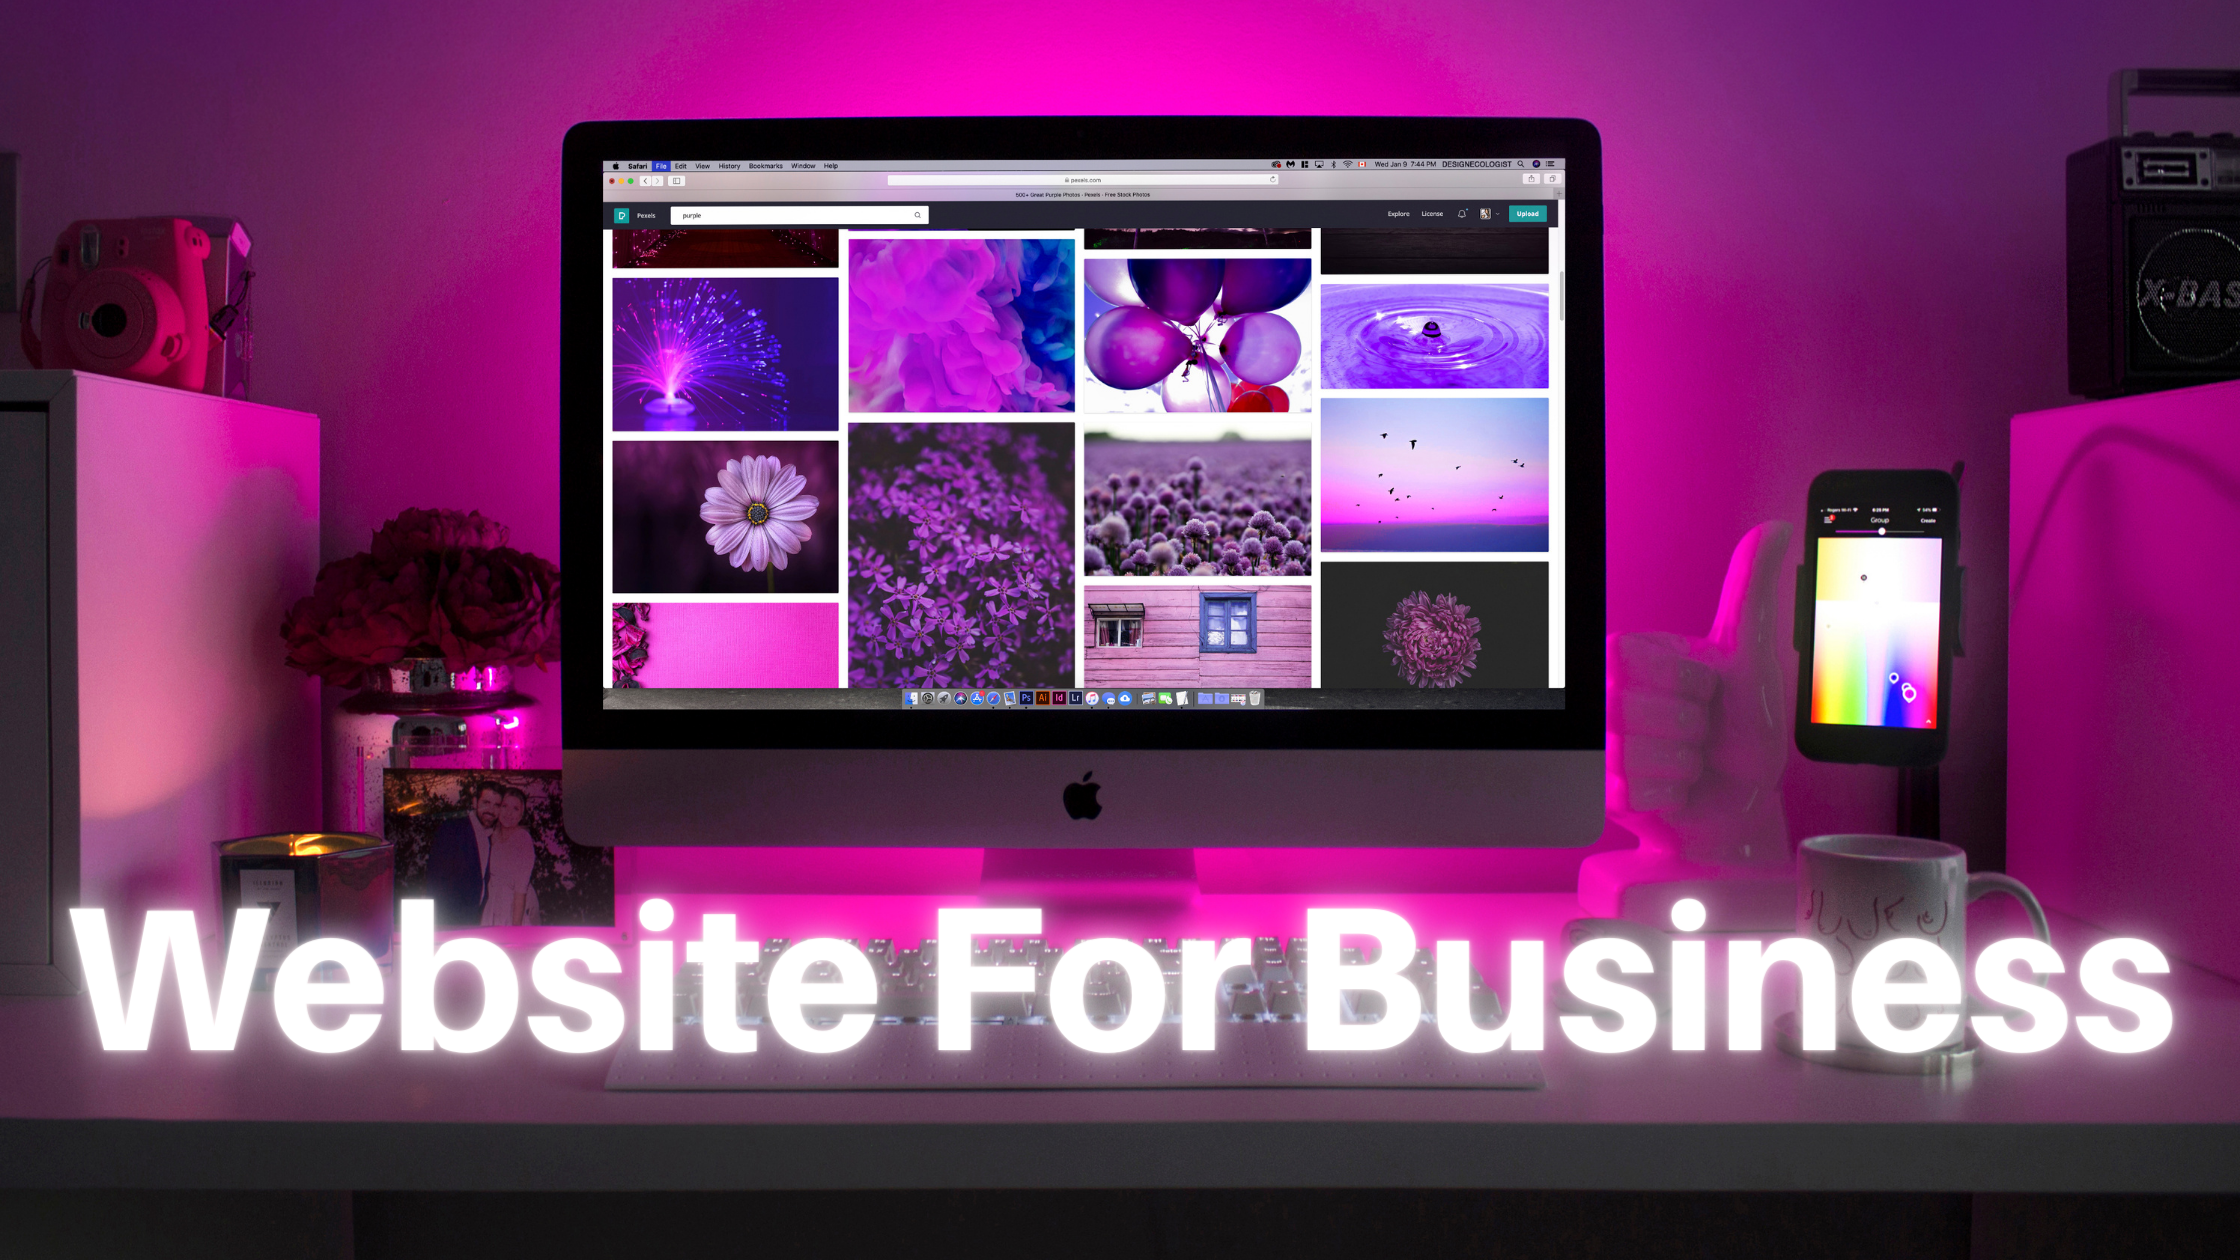 Why is a website important for business?